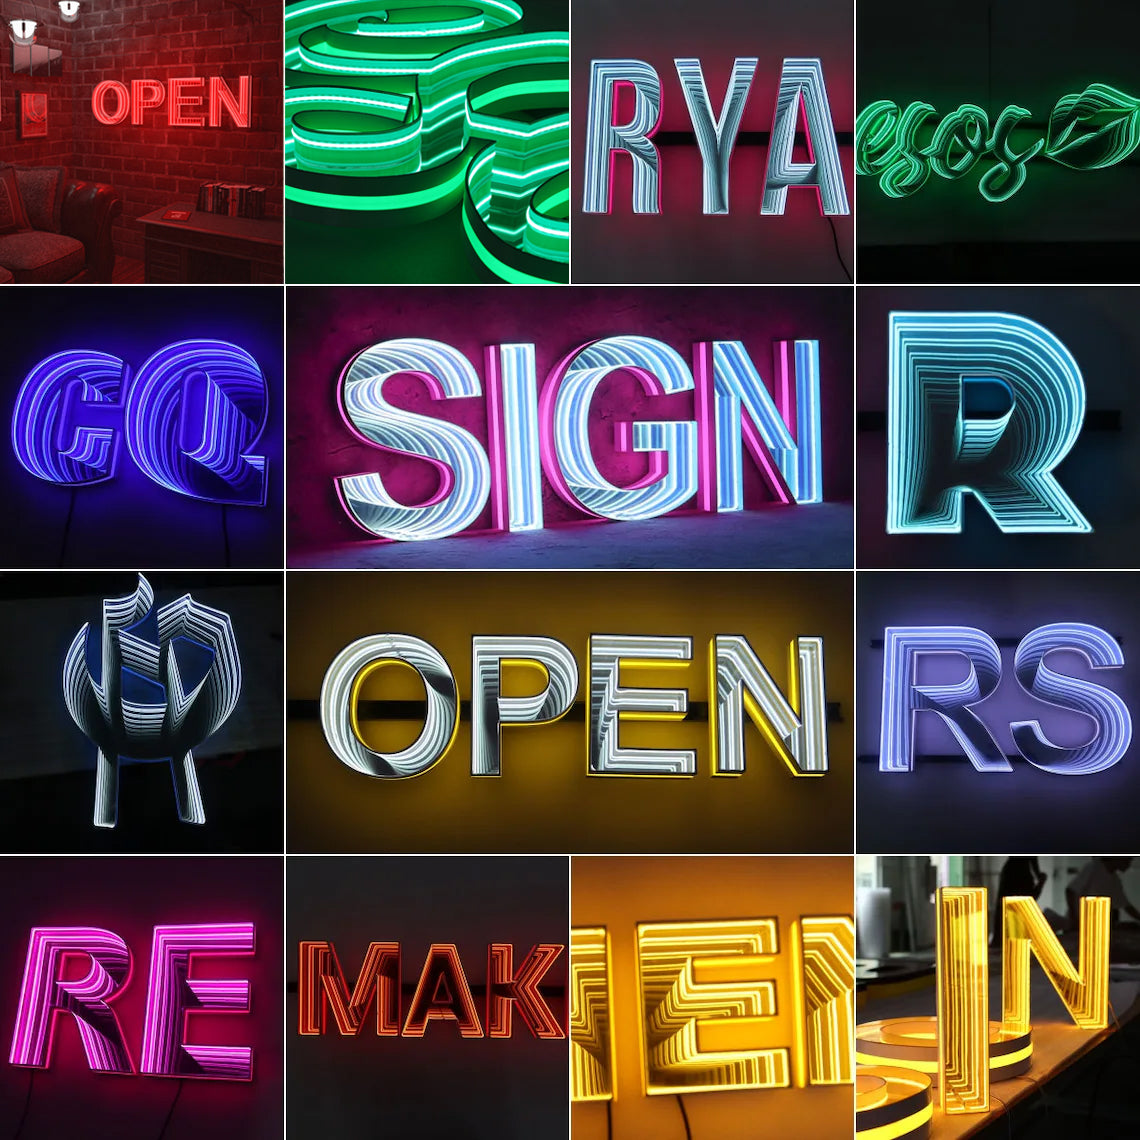 Custom 3D Infinity Mirror LED Light Sign - Personalized Channel Letters Sign